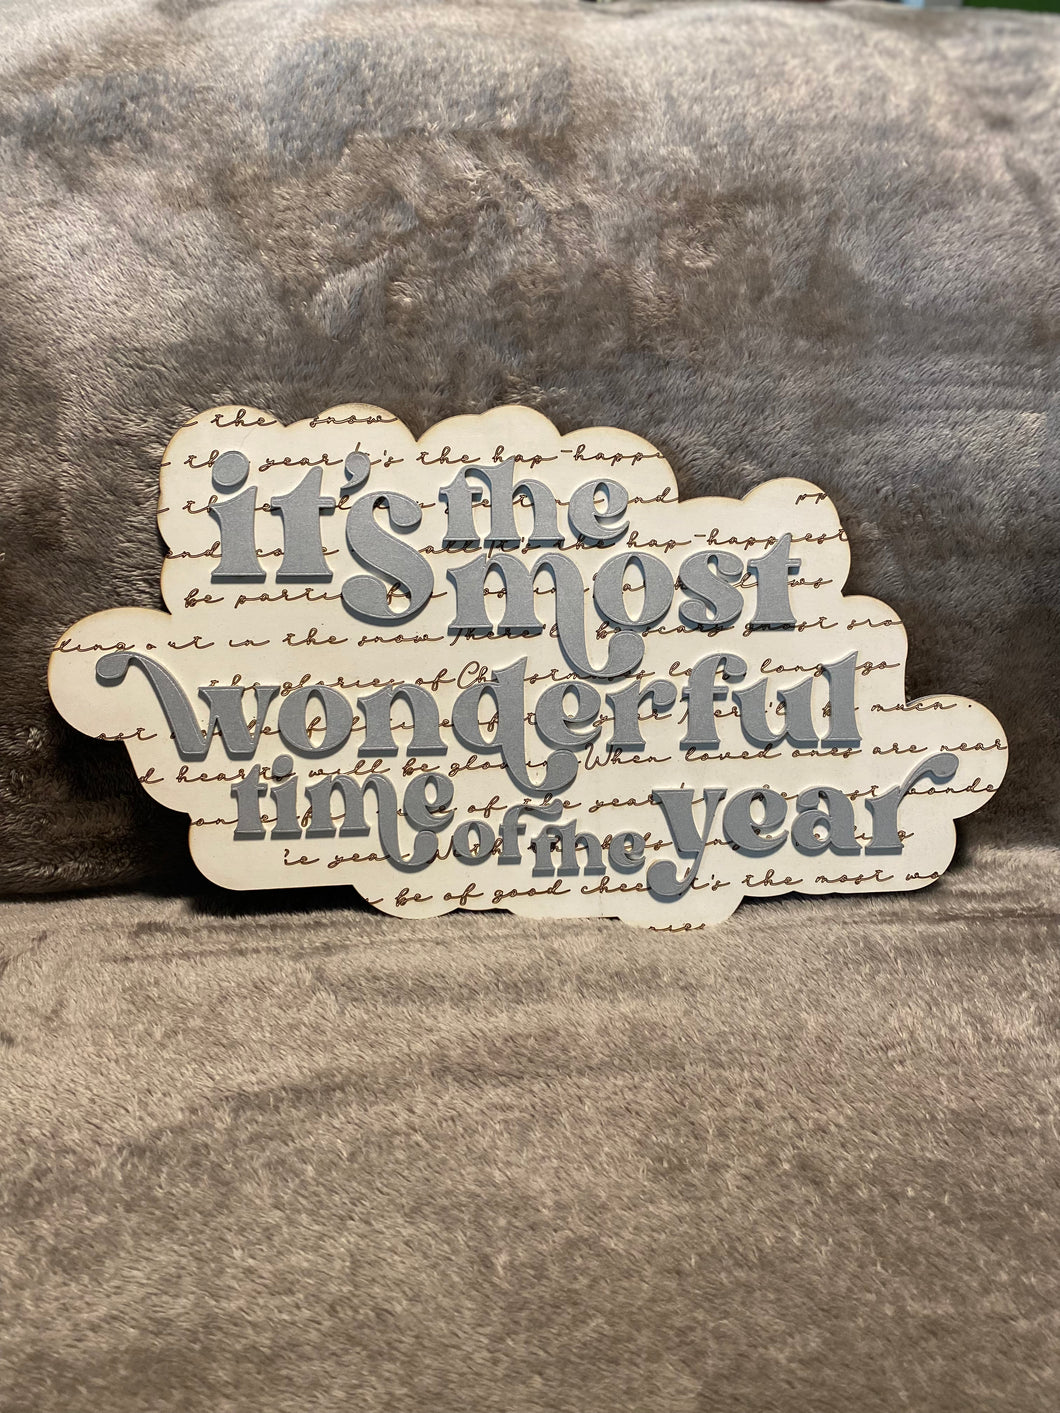 It's the Most Wonderful TIme of the Year Lyrics  - Christmas Sign / Decor